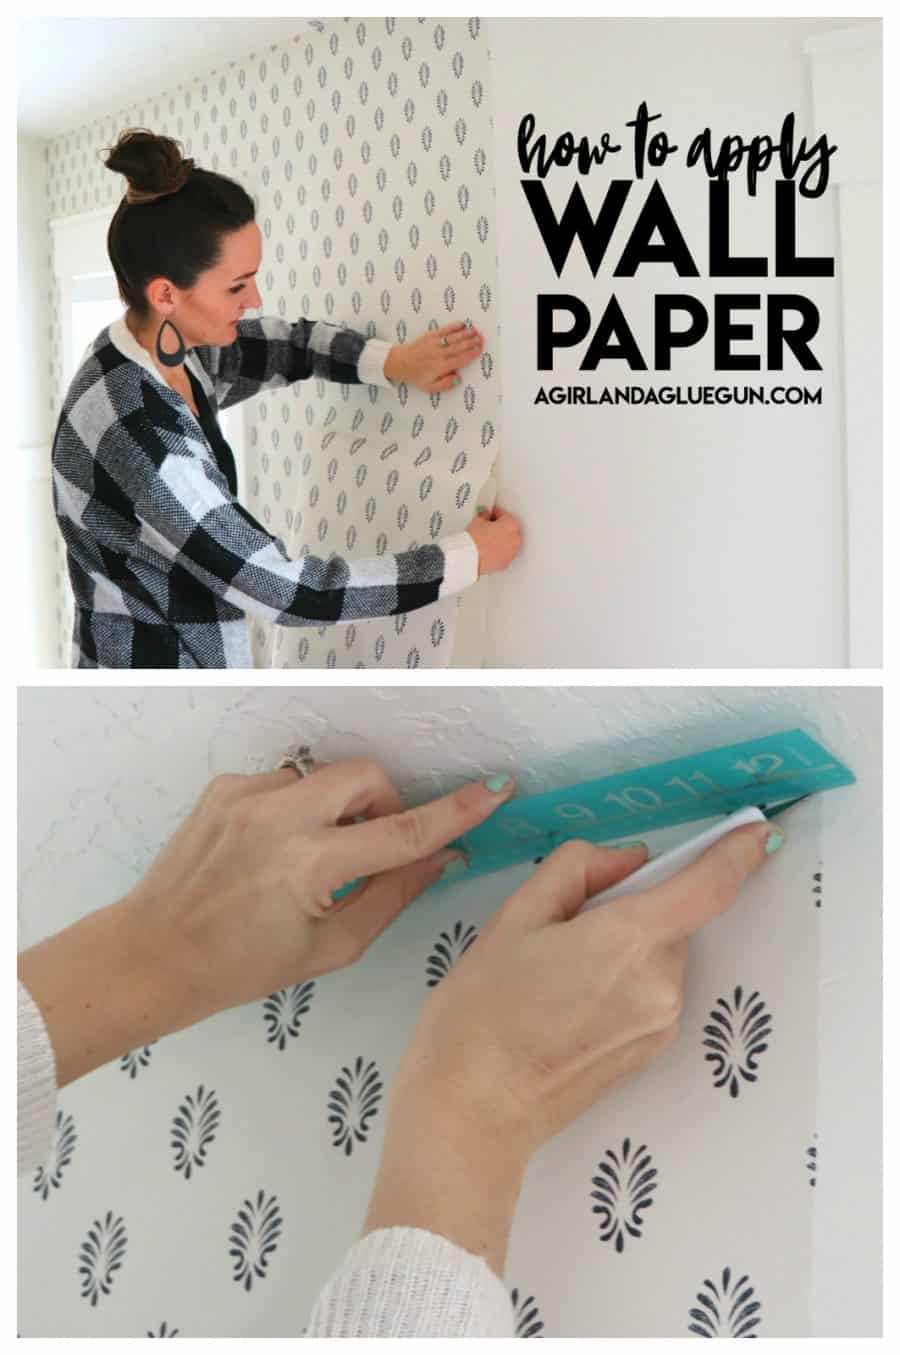 Everything you ever wanted to know about WALLPAPER - A girl and a glue gun